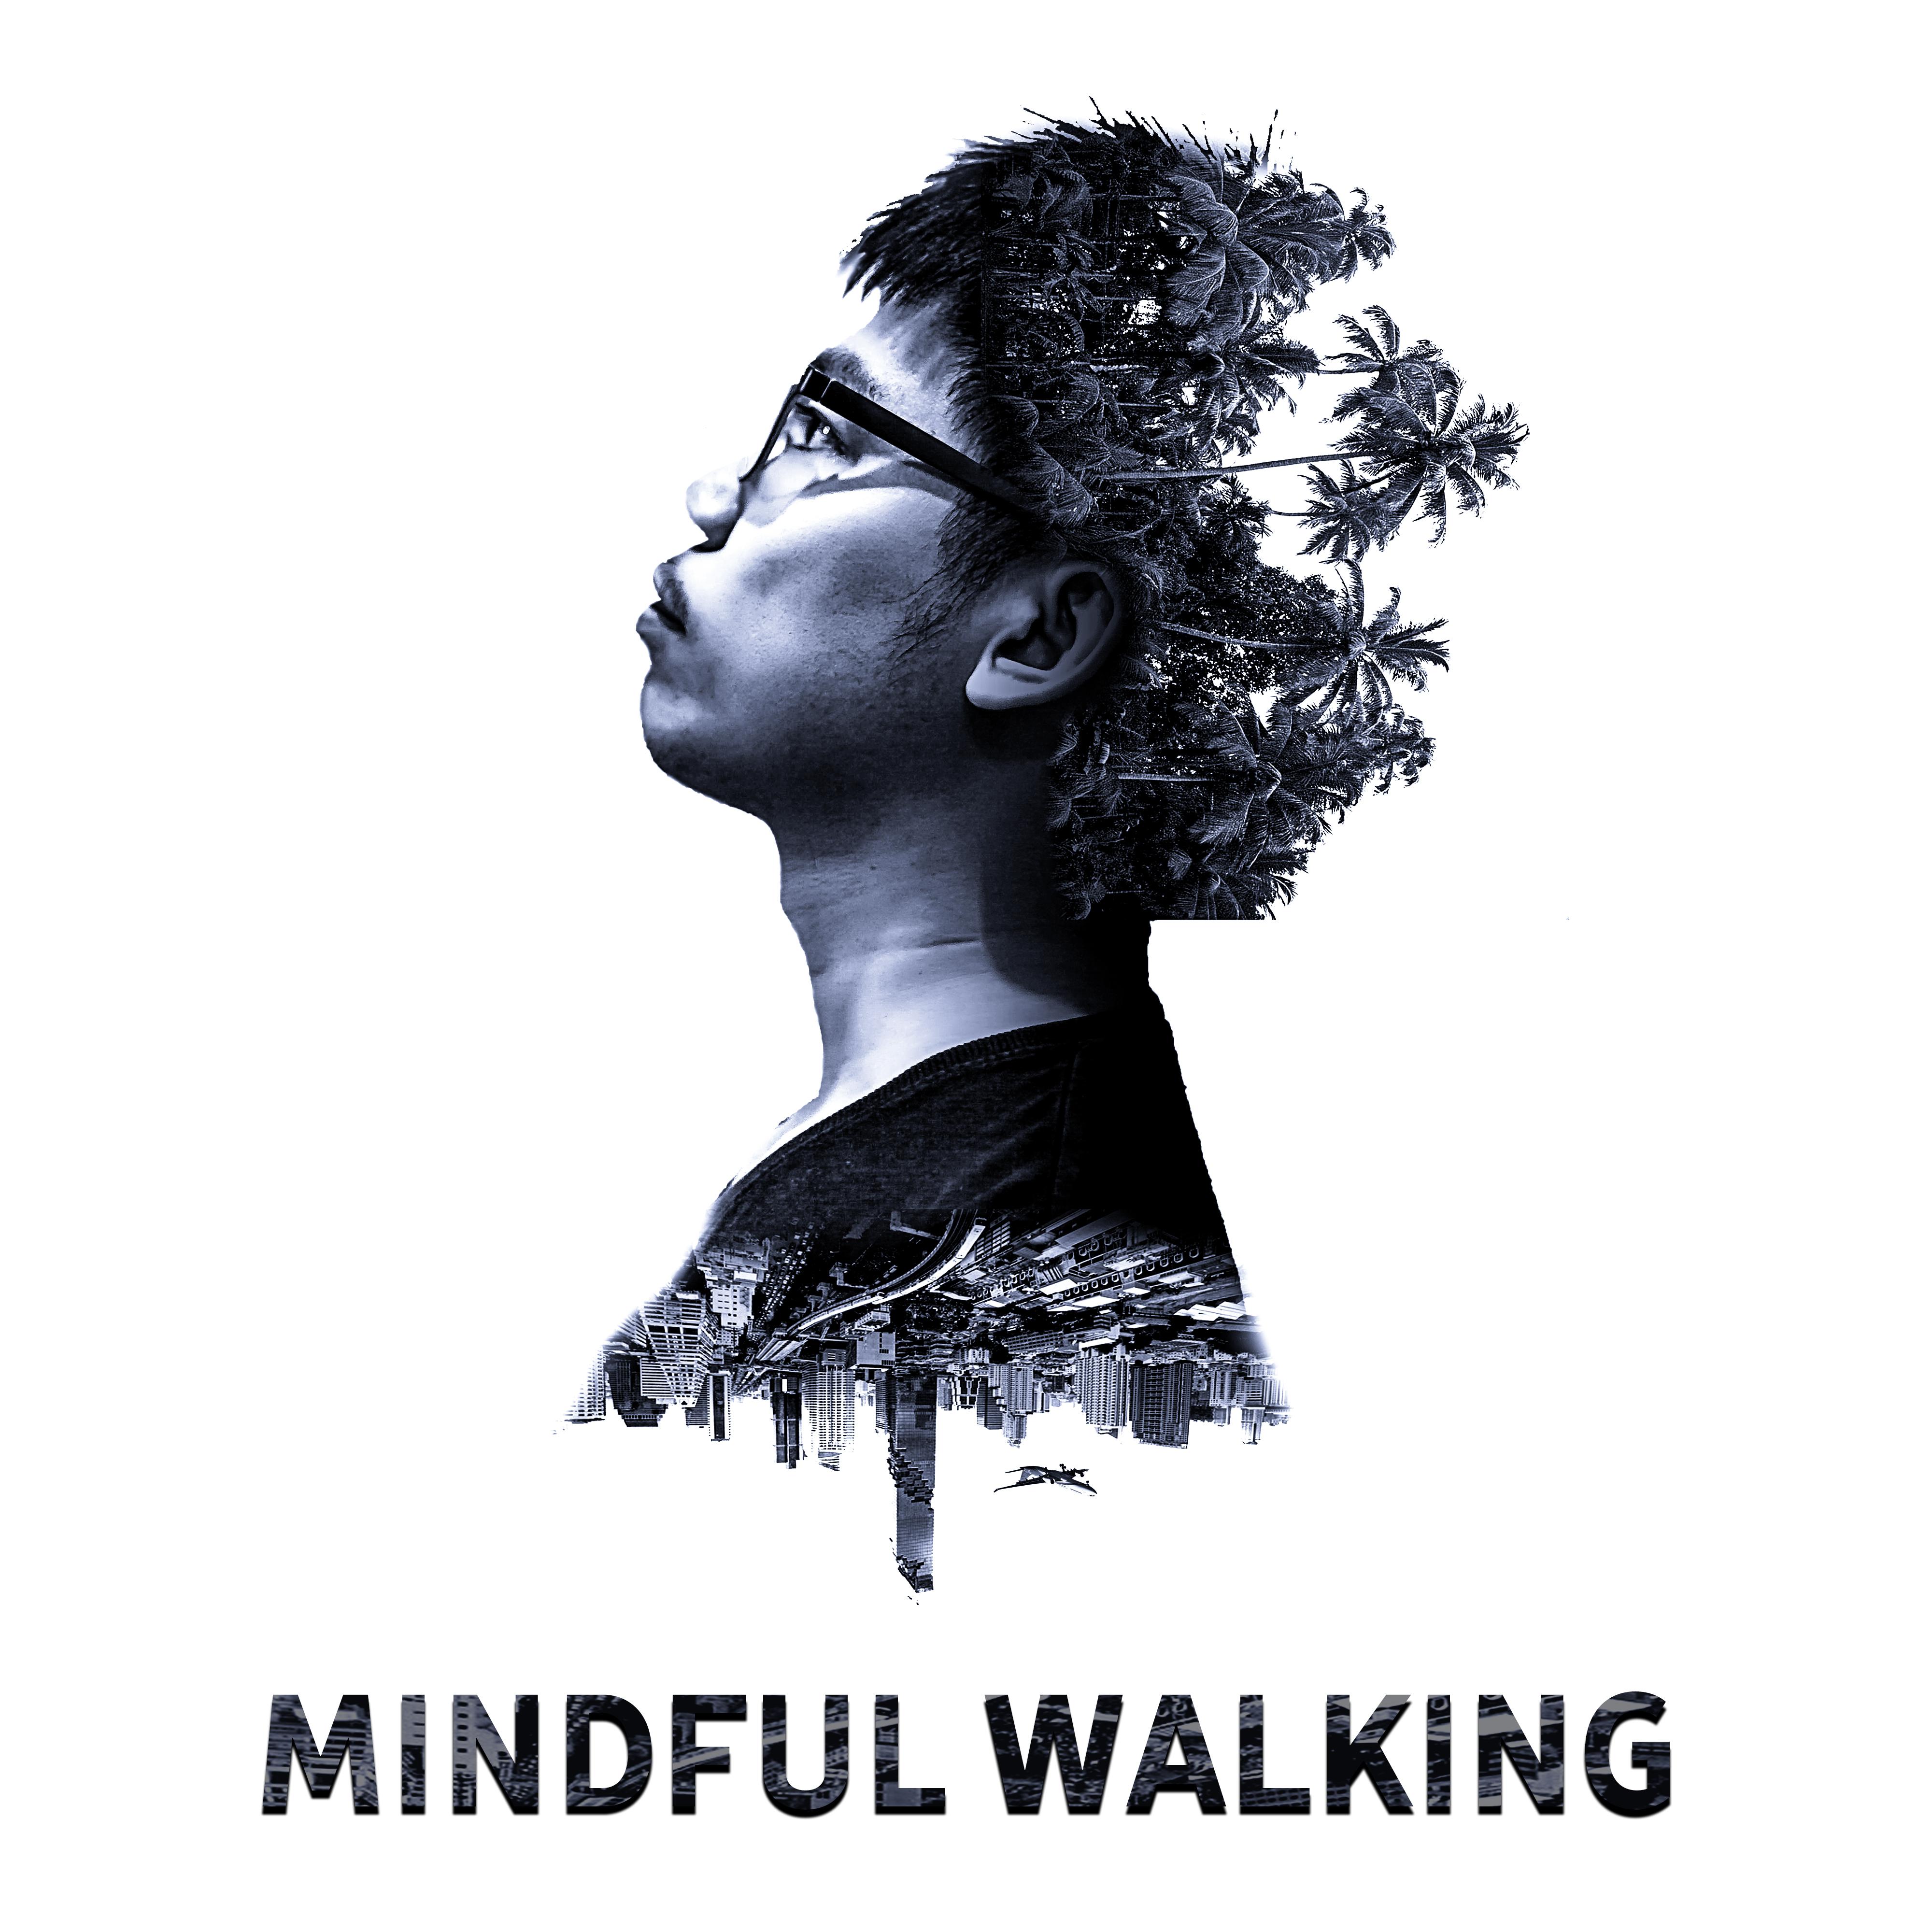 Mindful Walking  New Age Music for Meditation, Walking Meditation, Relaxed Body, Be Mindful